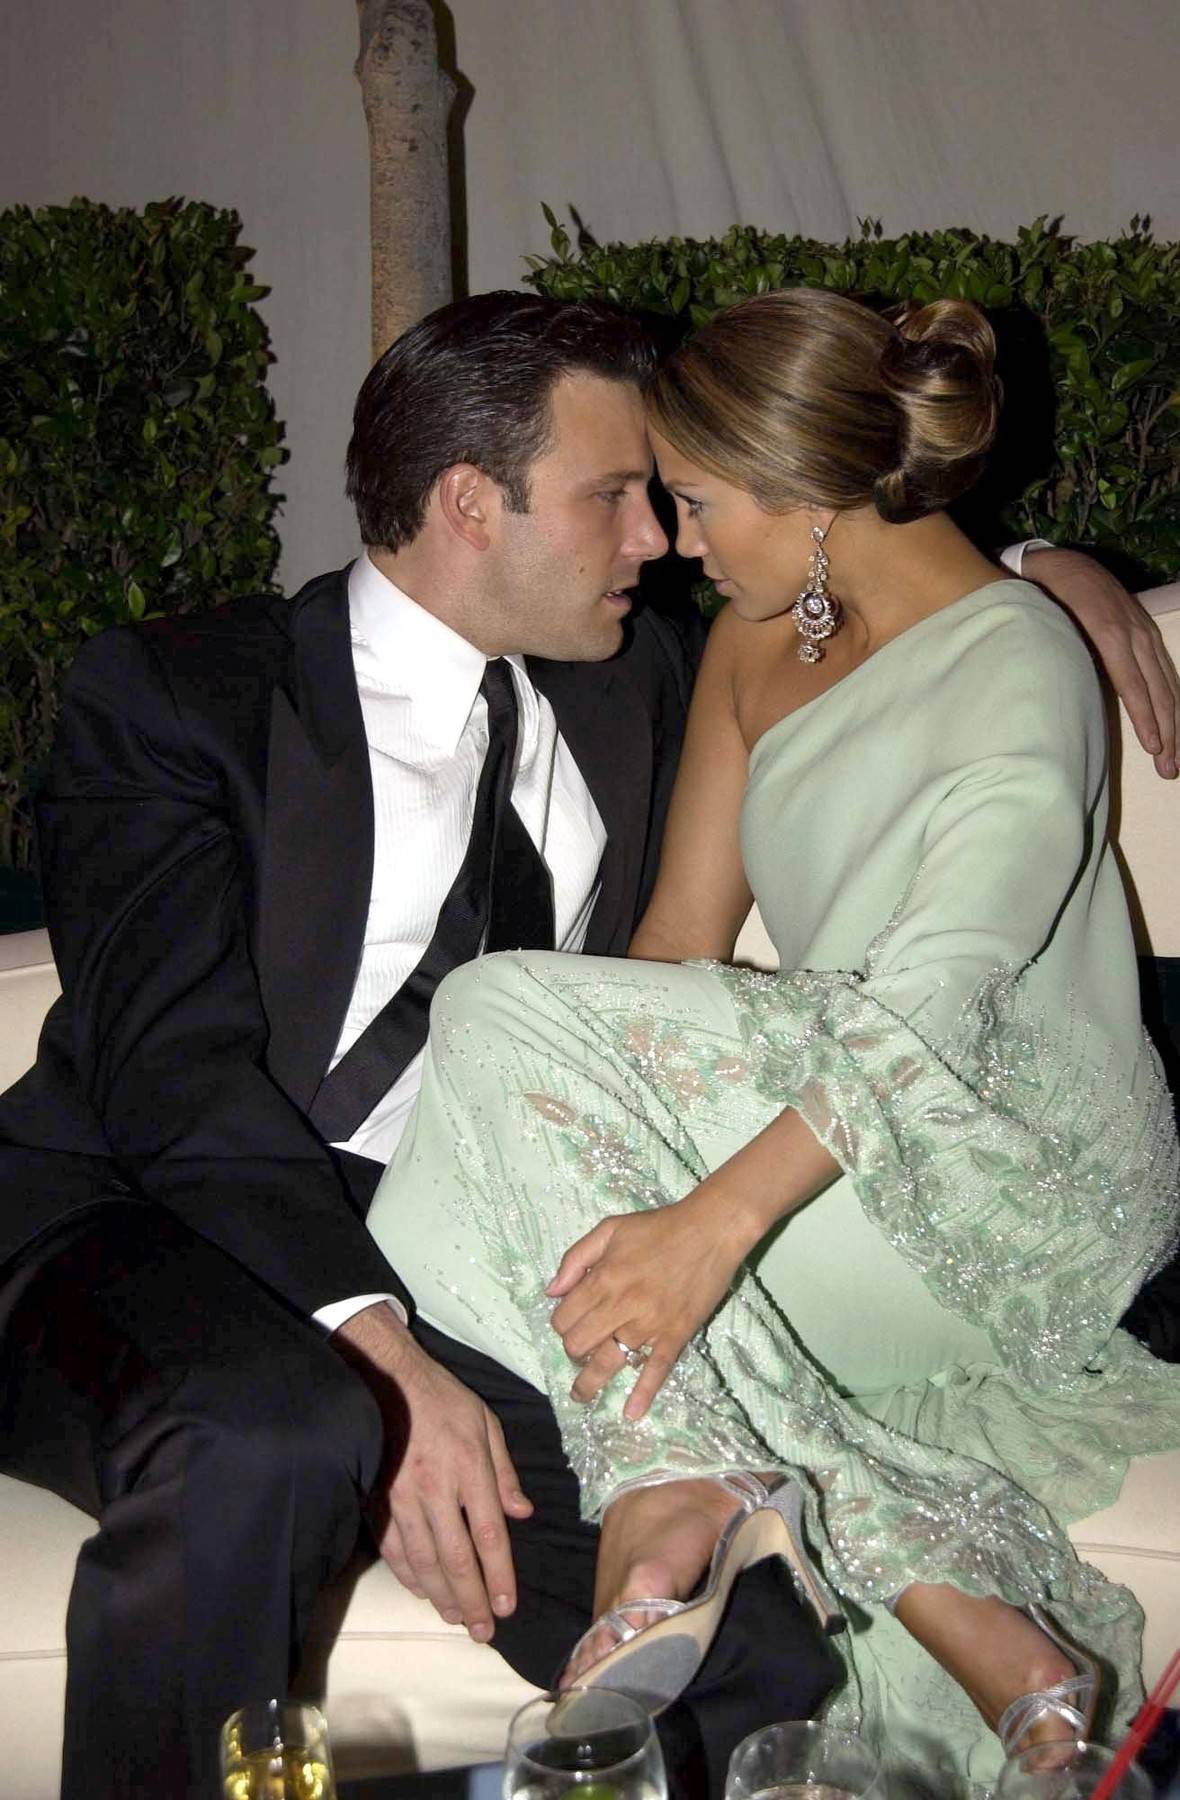 VANITY FAIR PARTY AT THE 2003 OSCARS / ACADEMY AWARDS AT MORTONS, LOS ANGELES, AMERICA - 23 MAR 2003